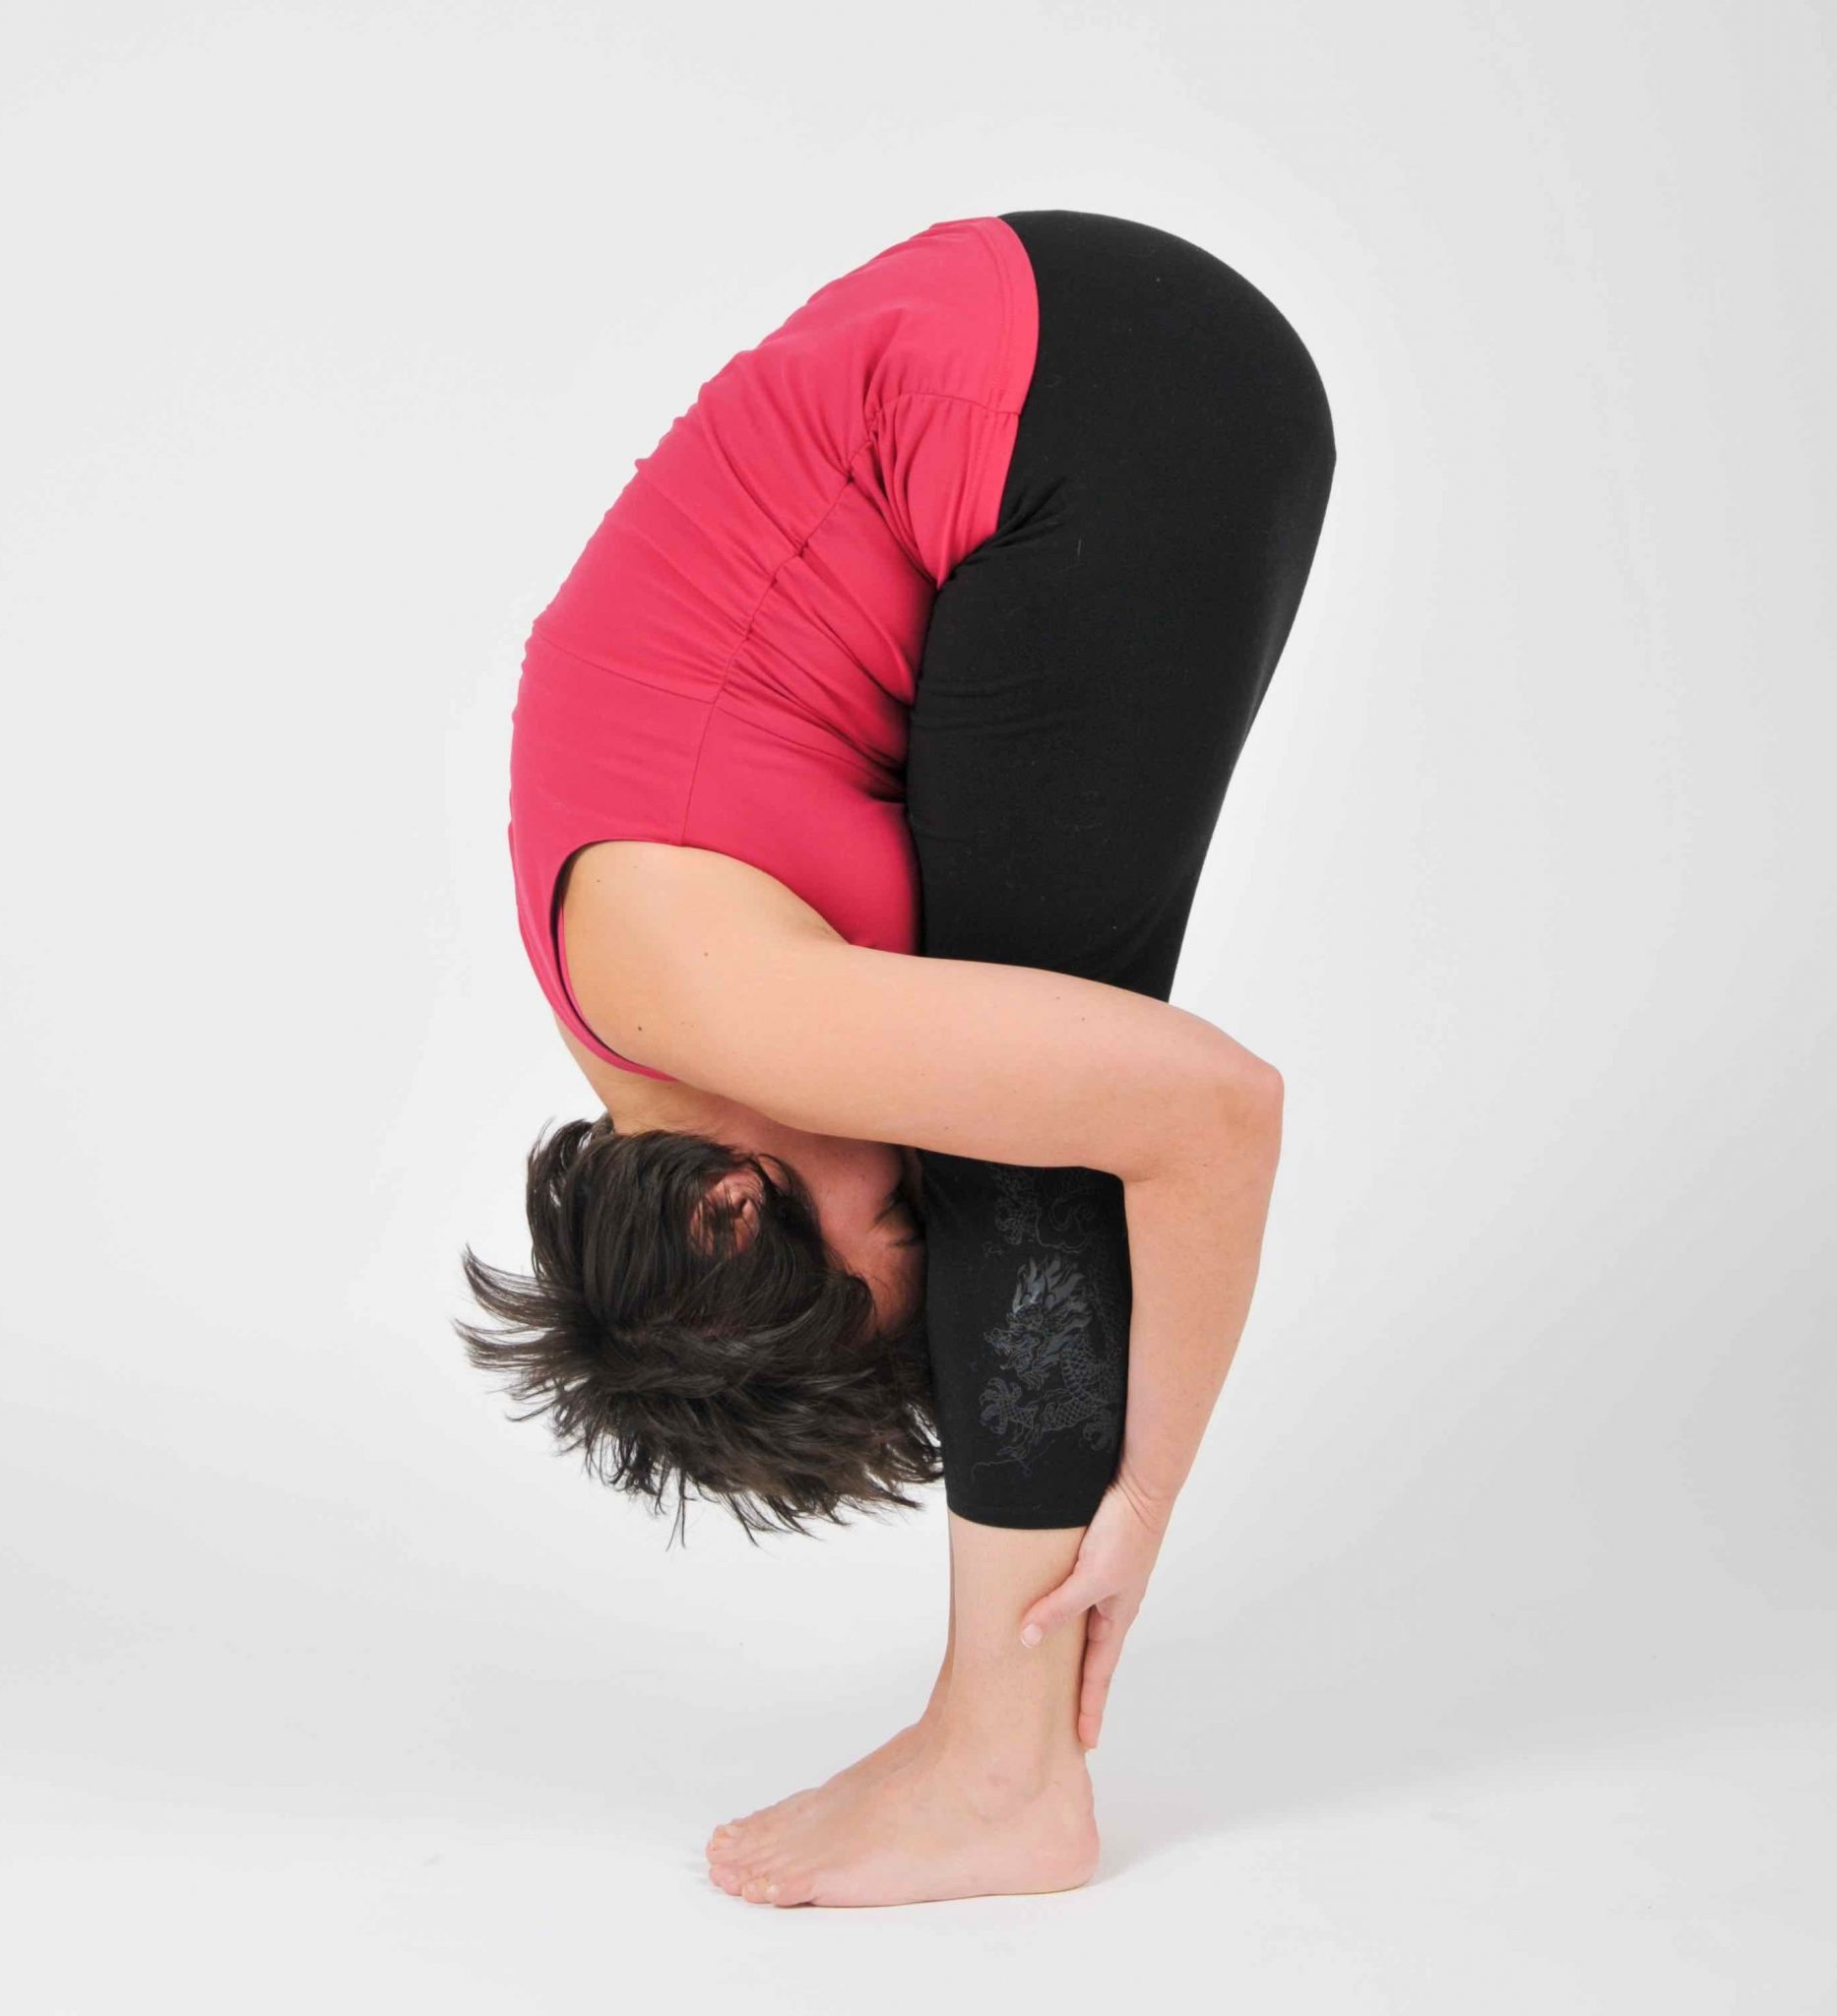 Which yoga asana is good to get relief in constipation? - Quora